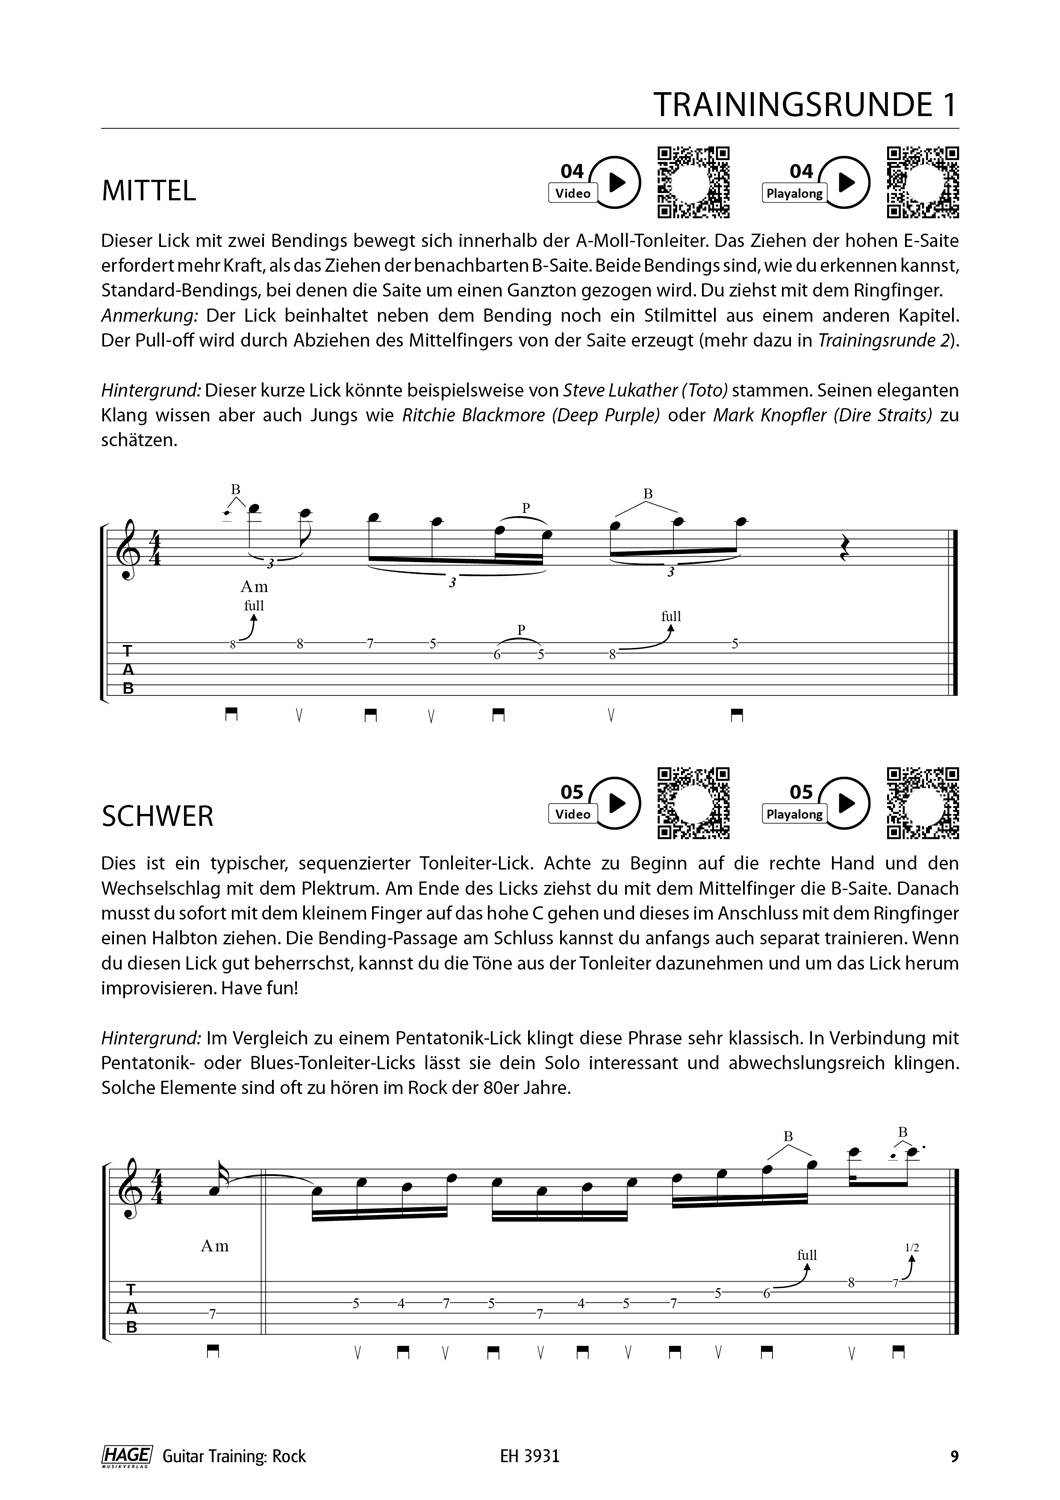 Guitar Training Rock Pages 8